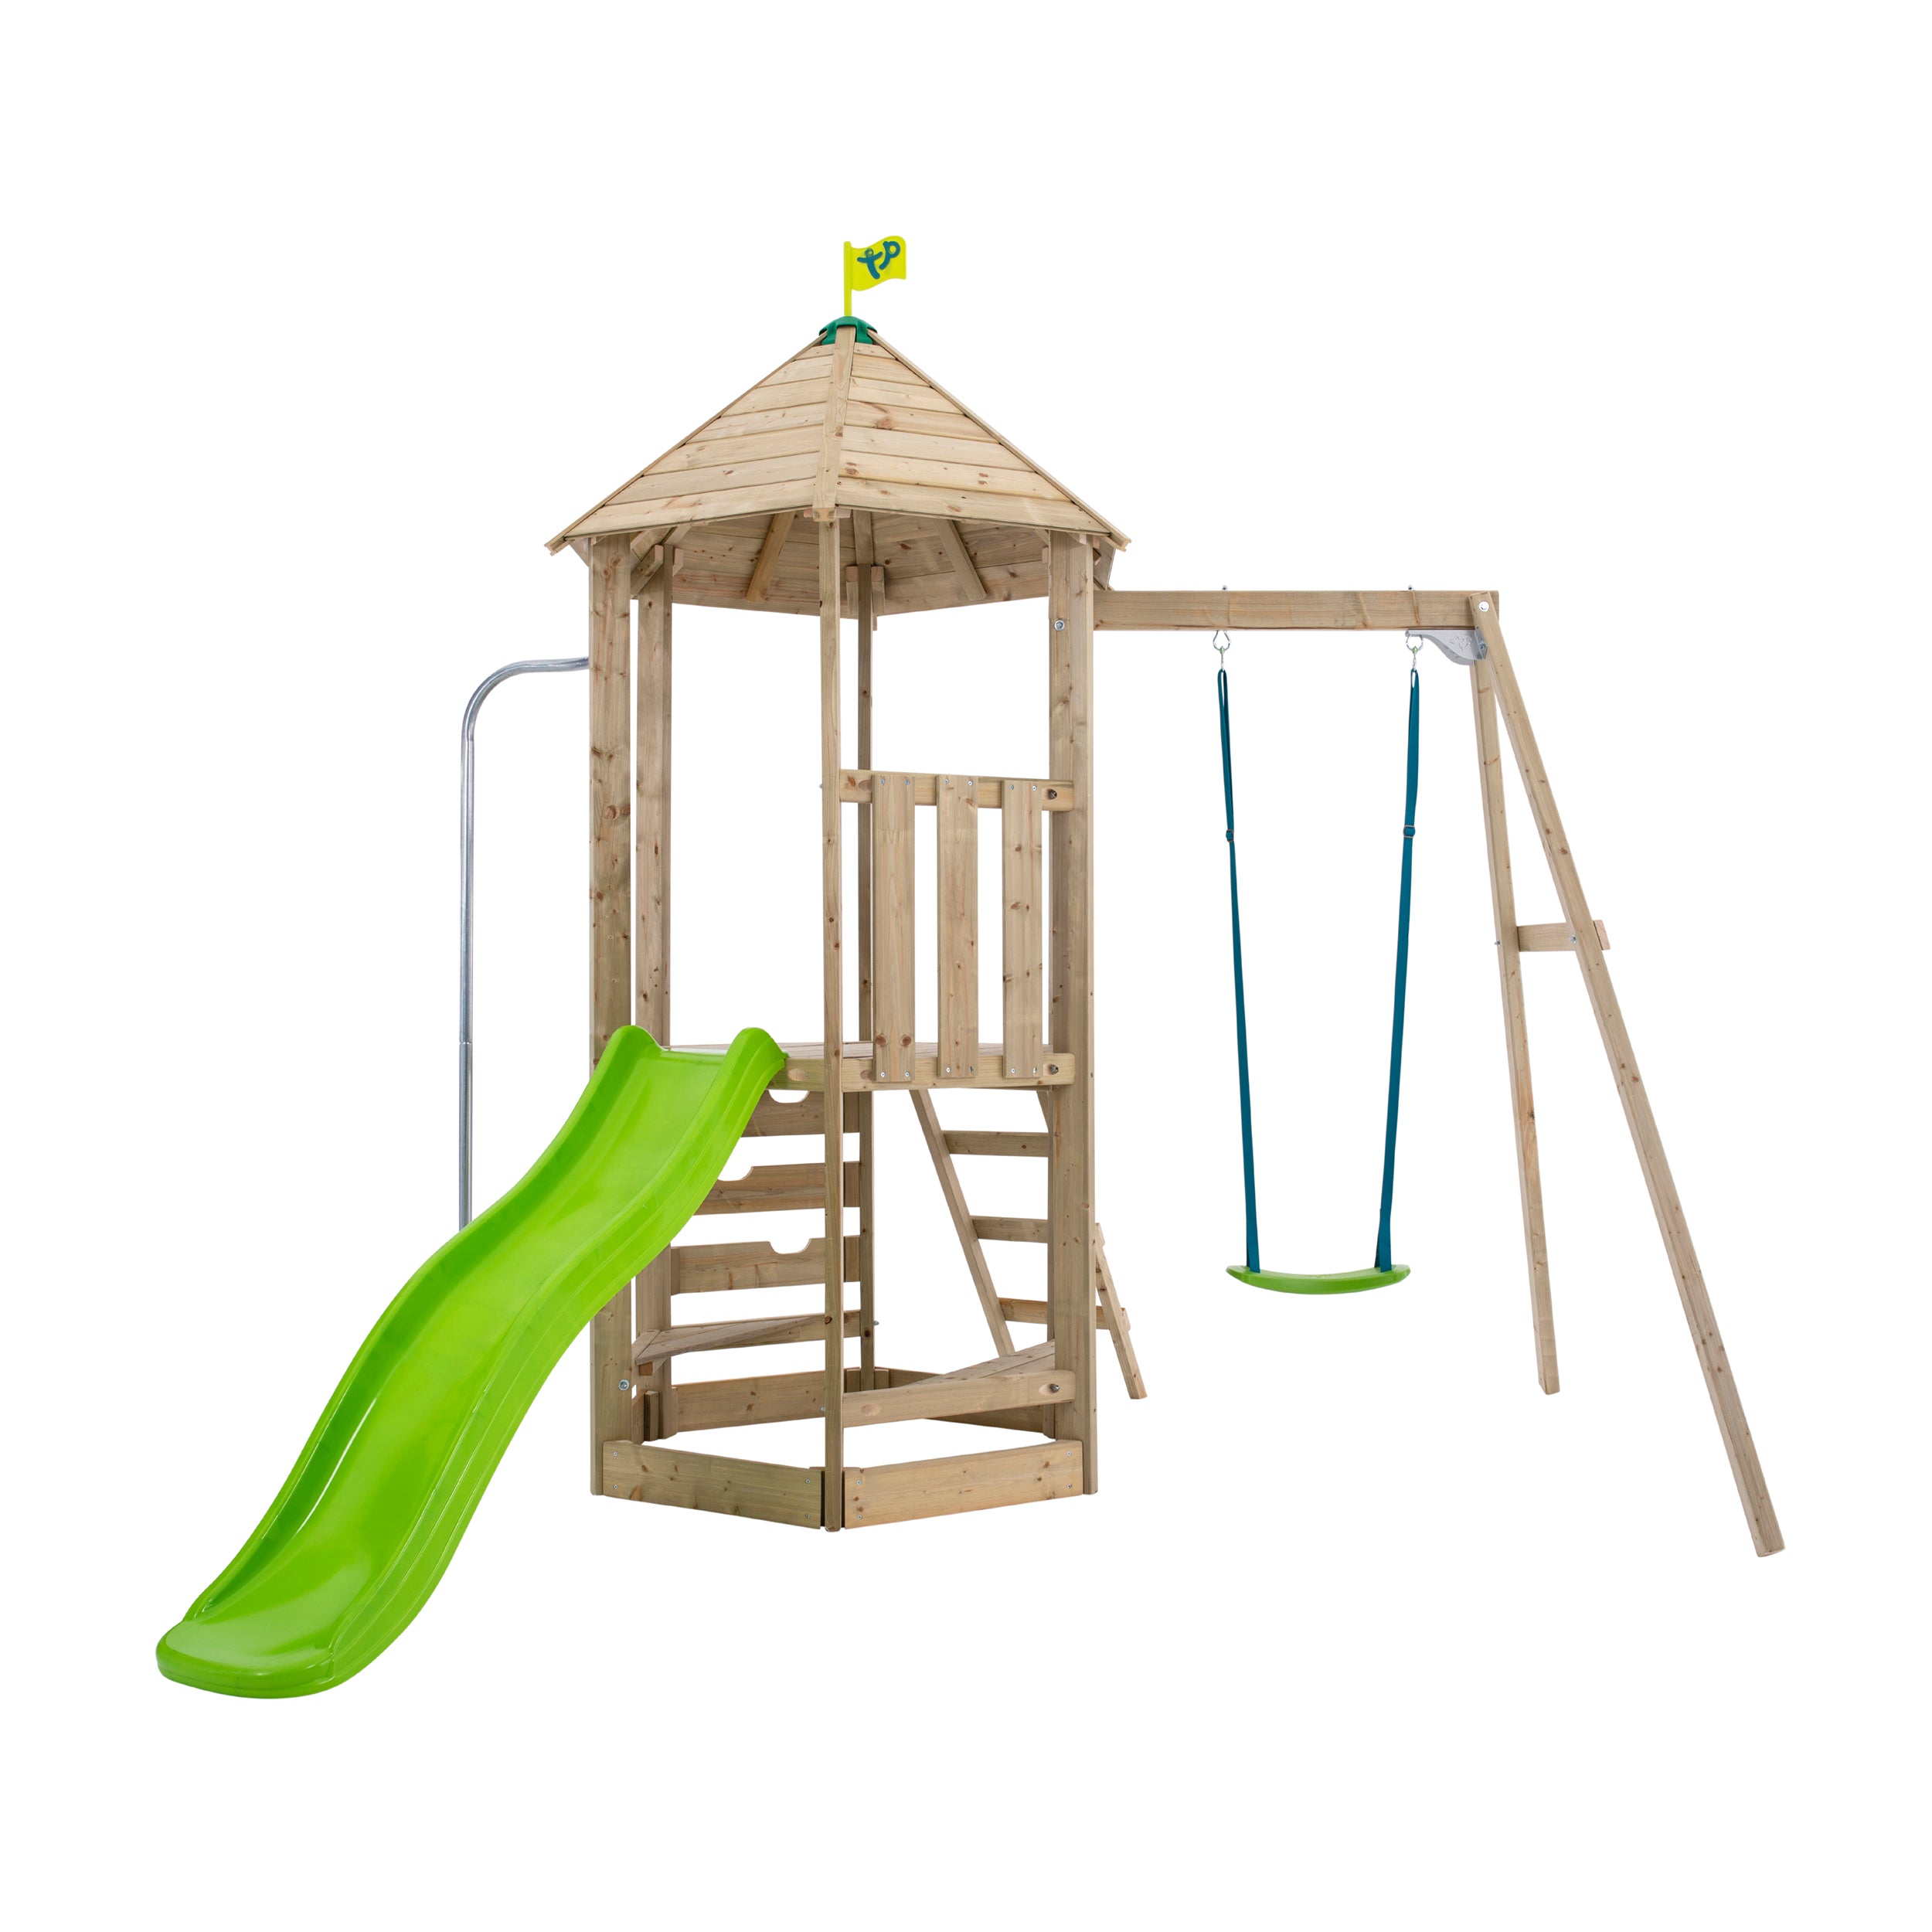 TP Castlewood Ludlow Wooden Climbing Frame with Single Swing Set & Slide - FSC<sup>®</sup> certified